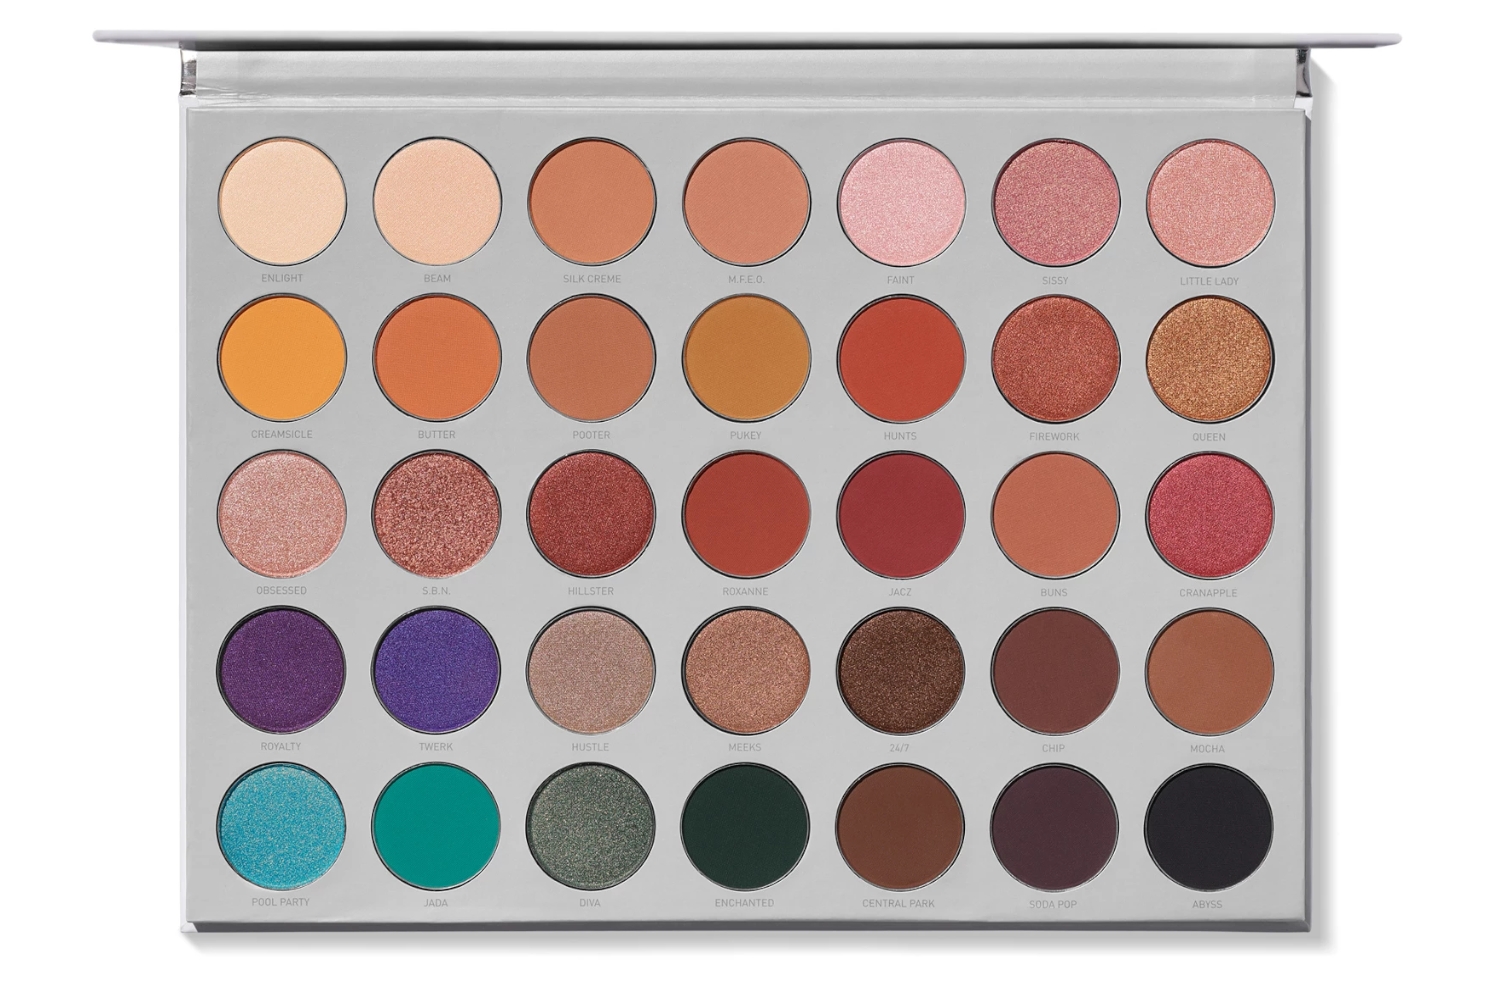 jaclyn hill morphe palette of a white background